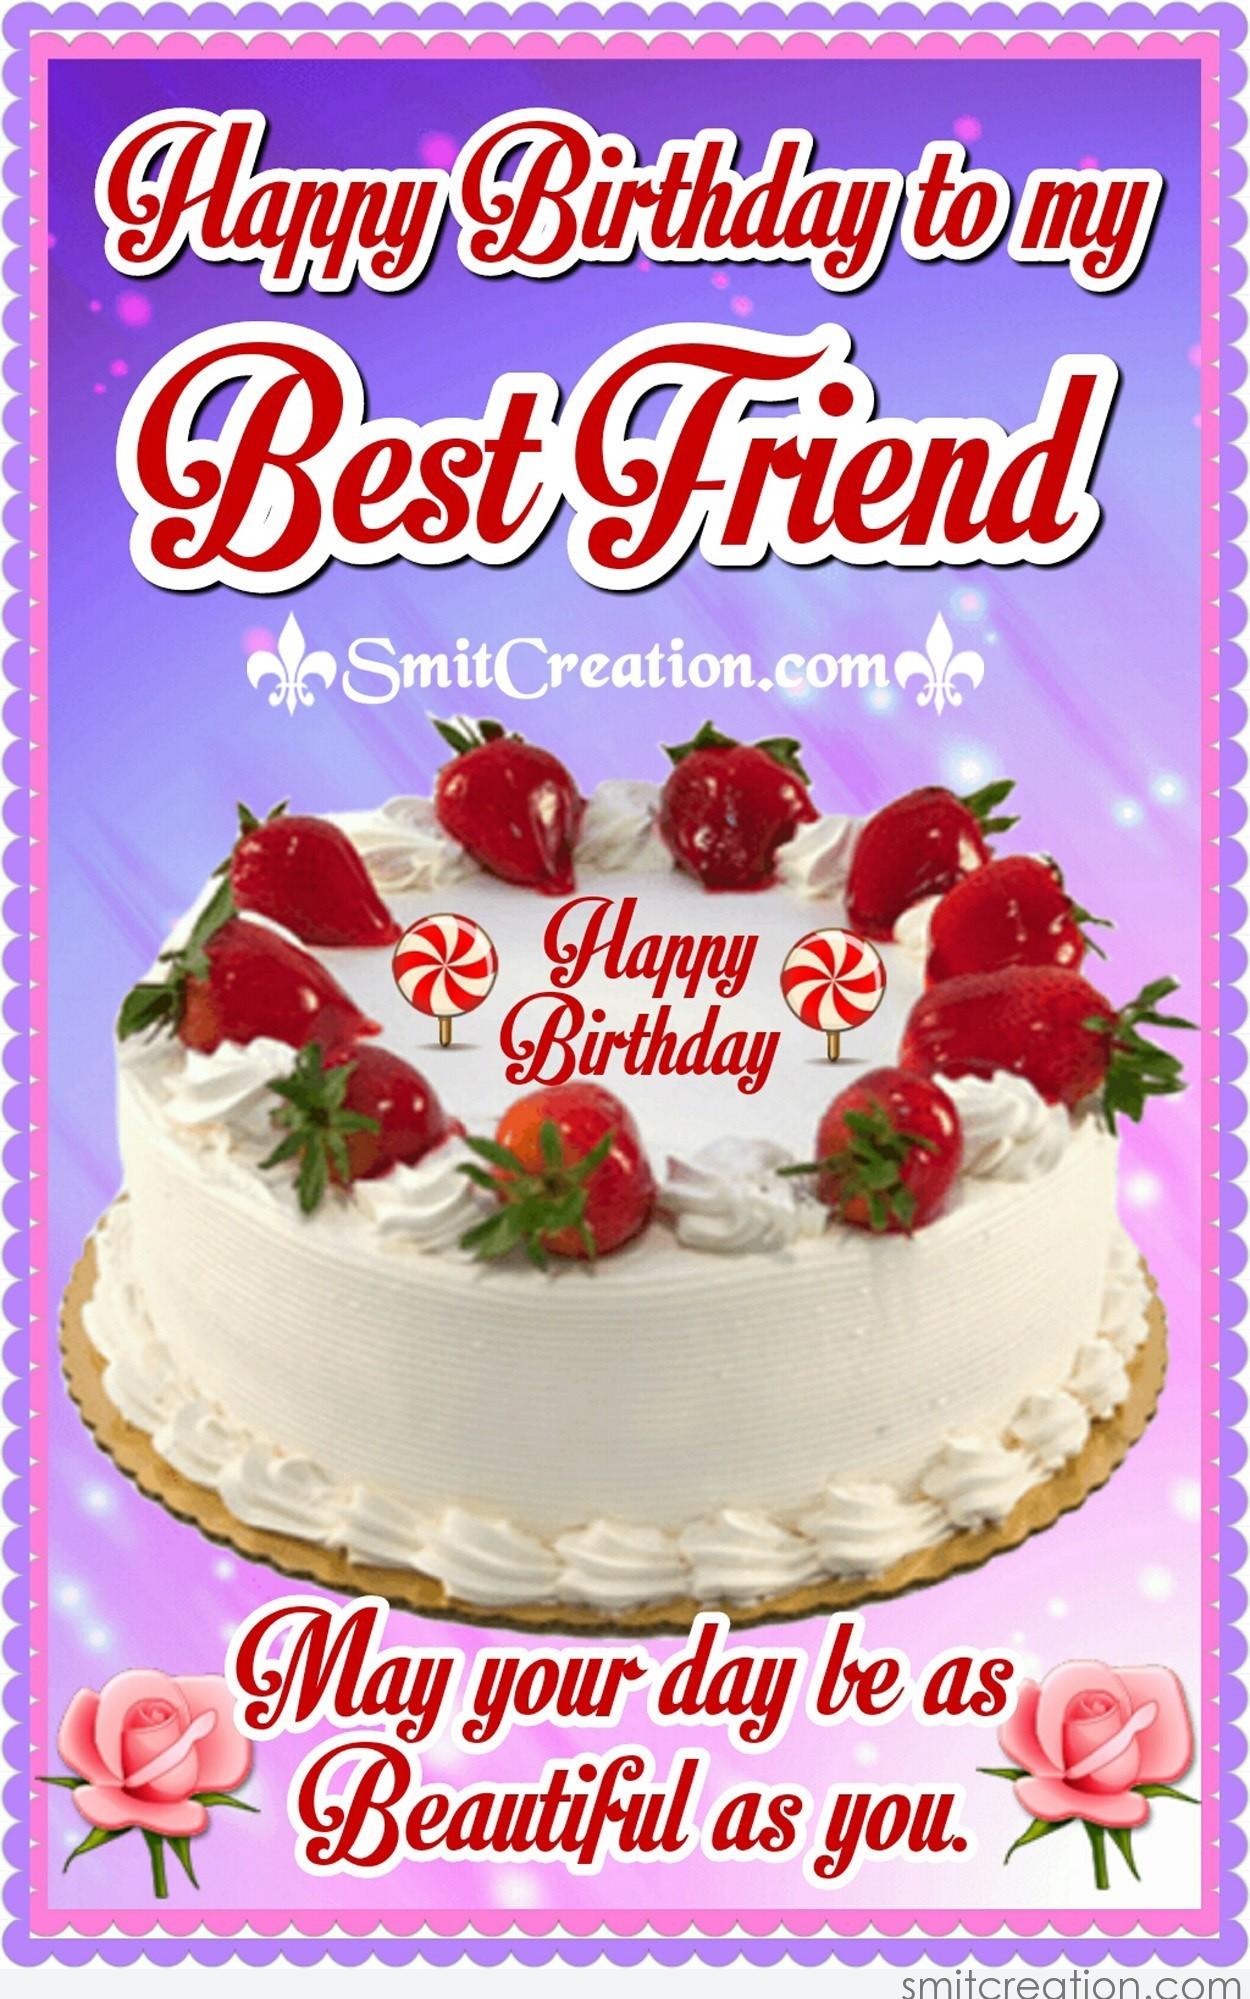 Birthday Wishes for Girlfriend Pictures and Graphics - SmitCreation.com ...